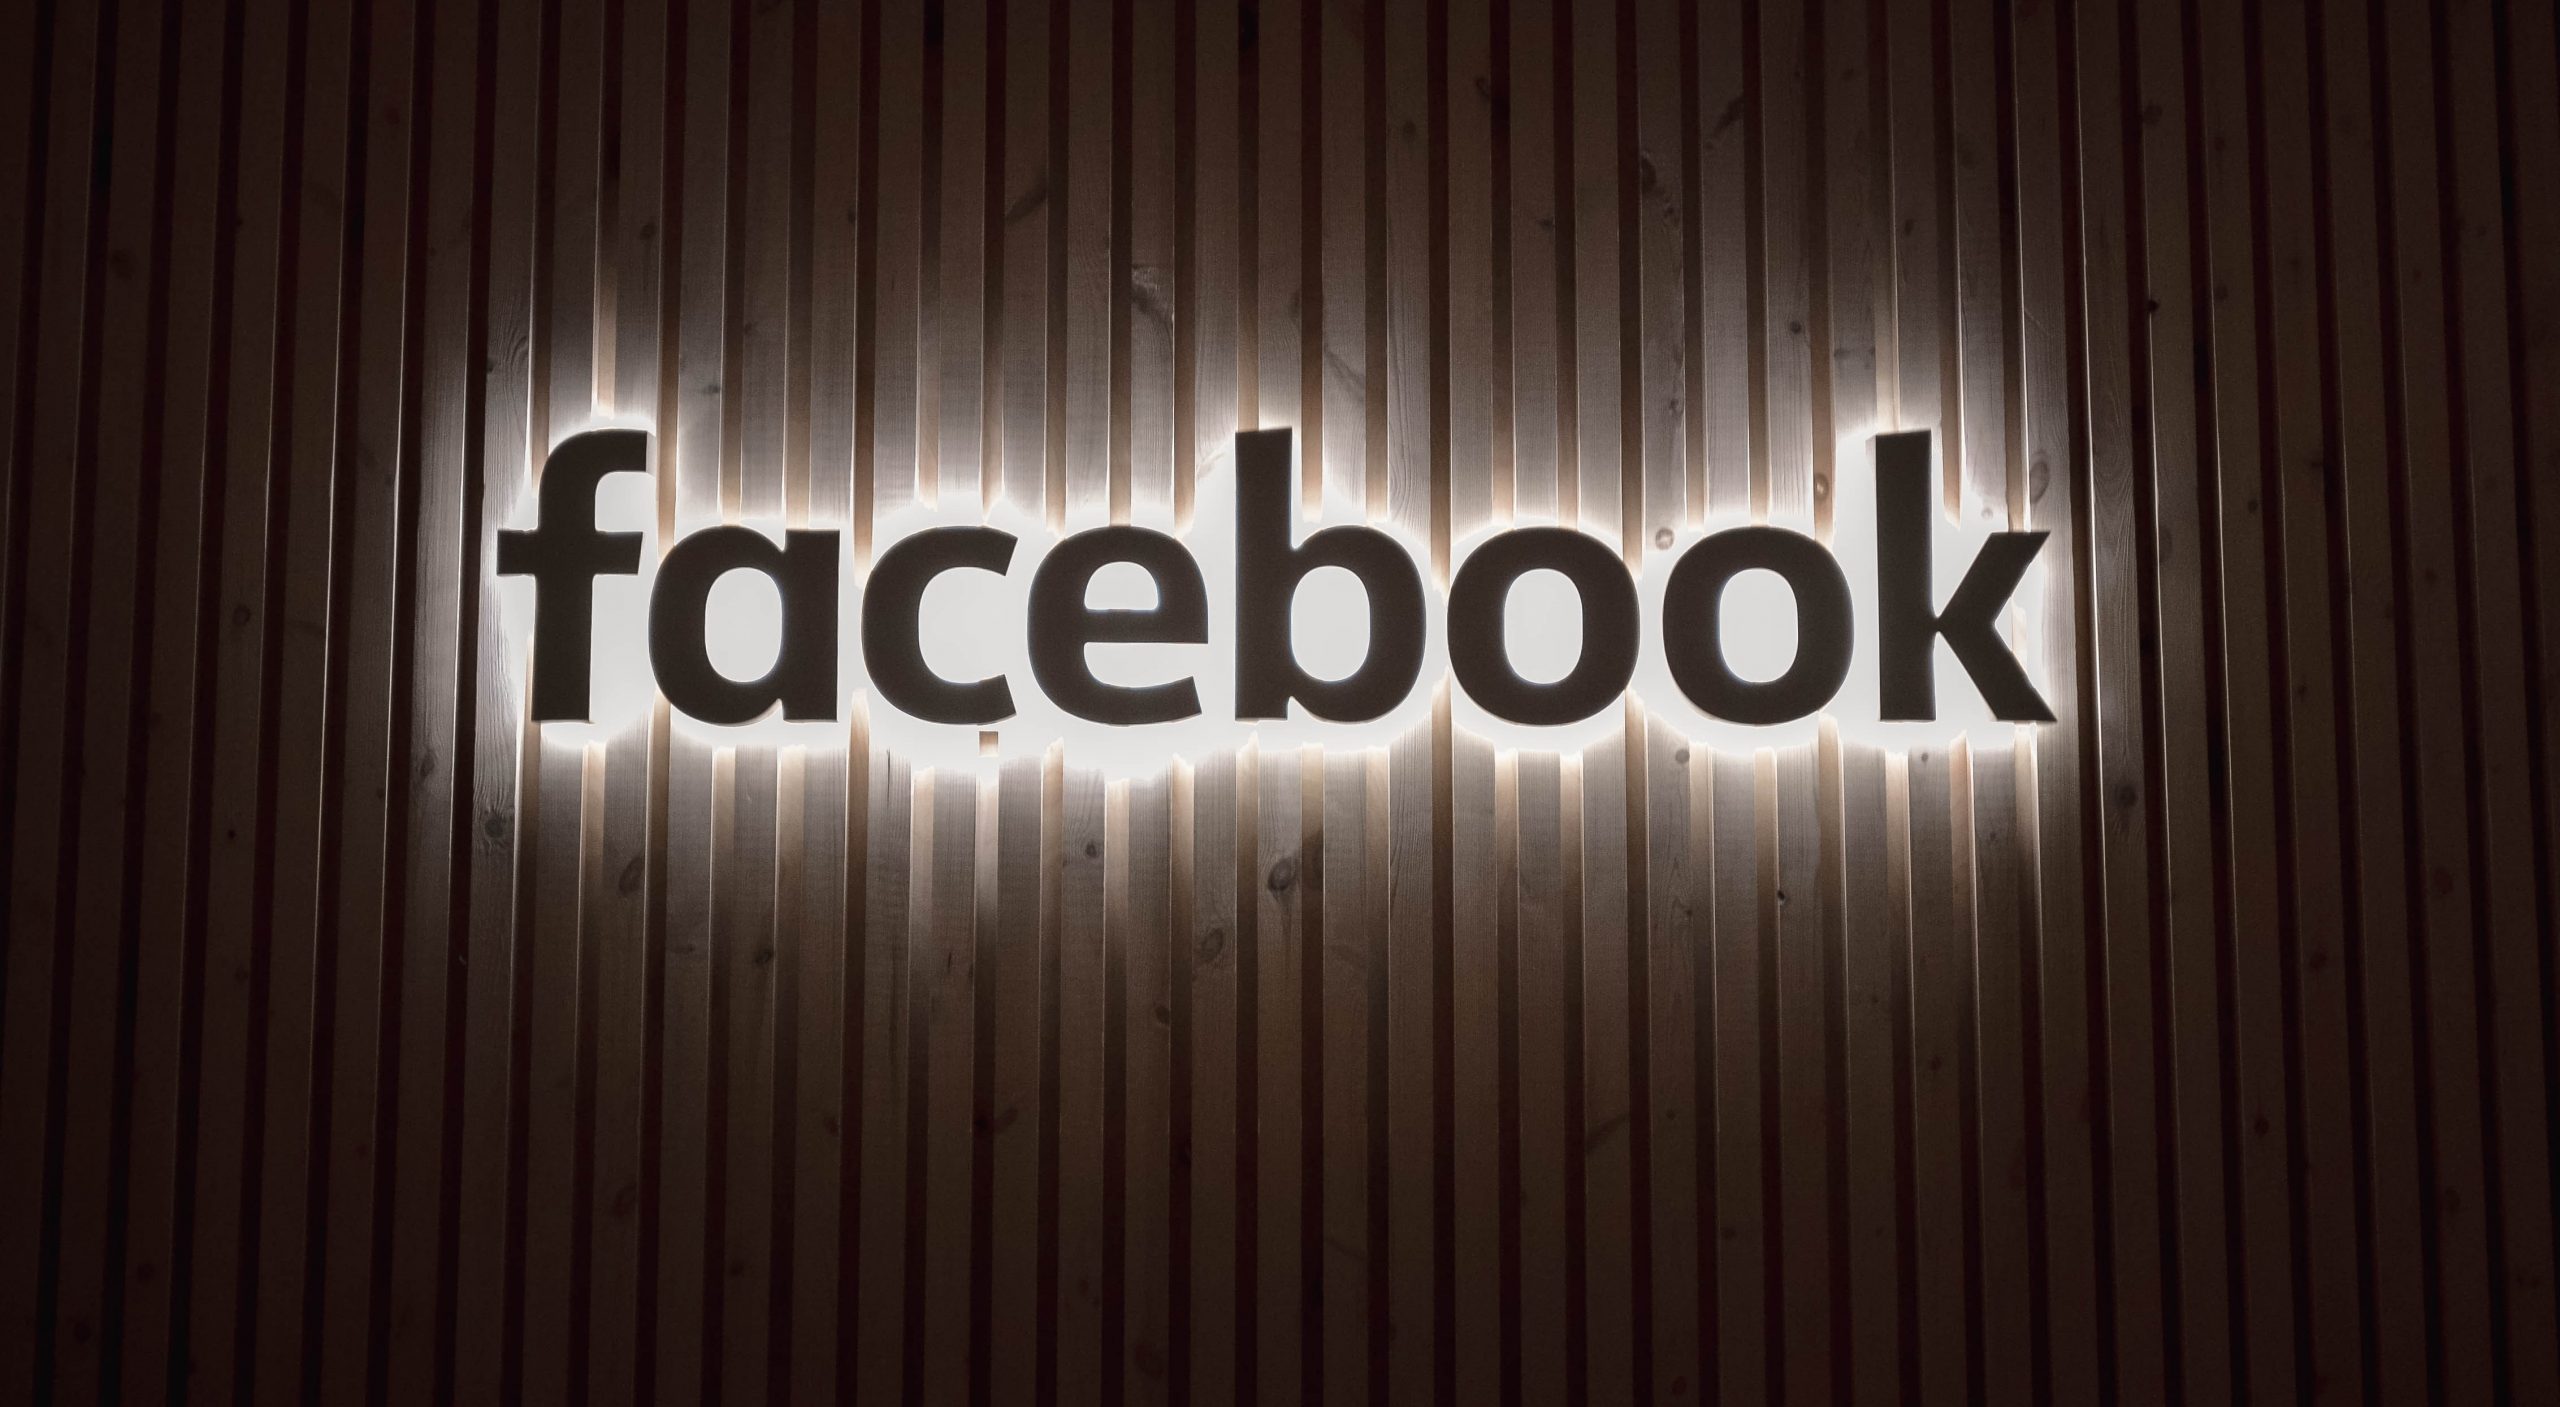 Facebook music video streams to be included on Billboard Charts for first time